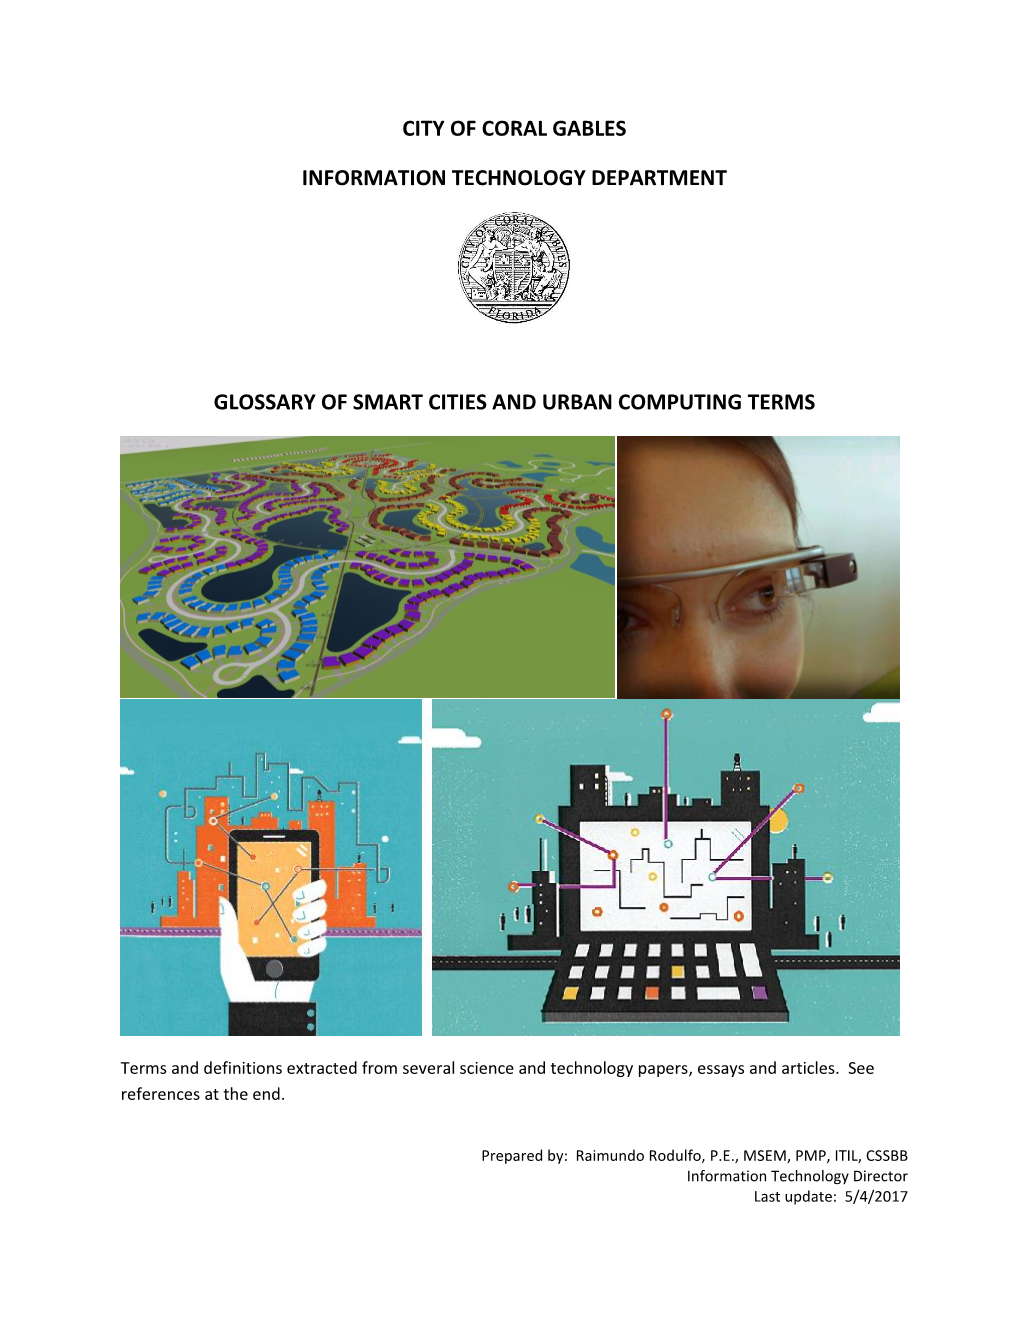 City of Coral Gables Information Technology Department Glossary of Smart Cities and Urban Computing Terms